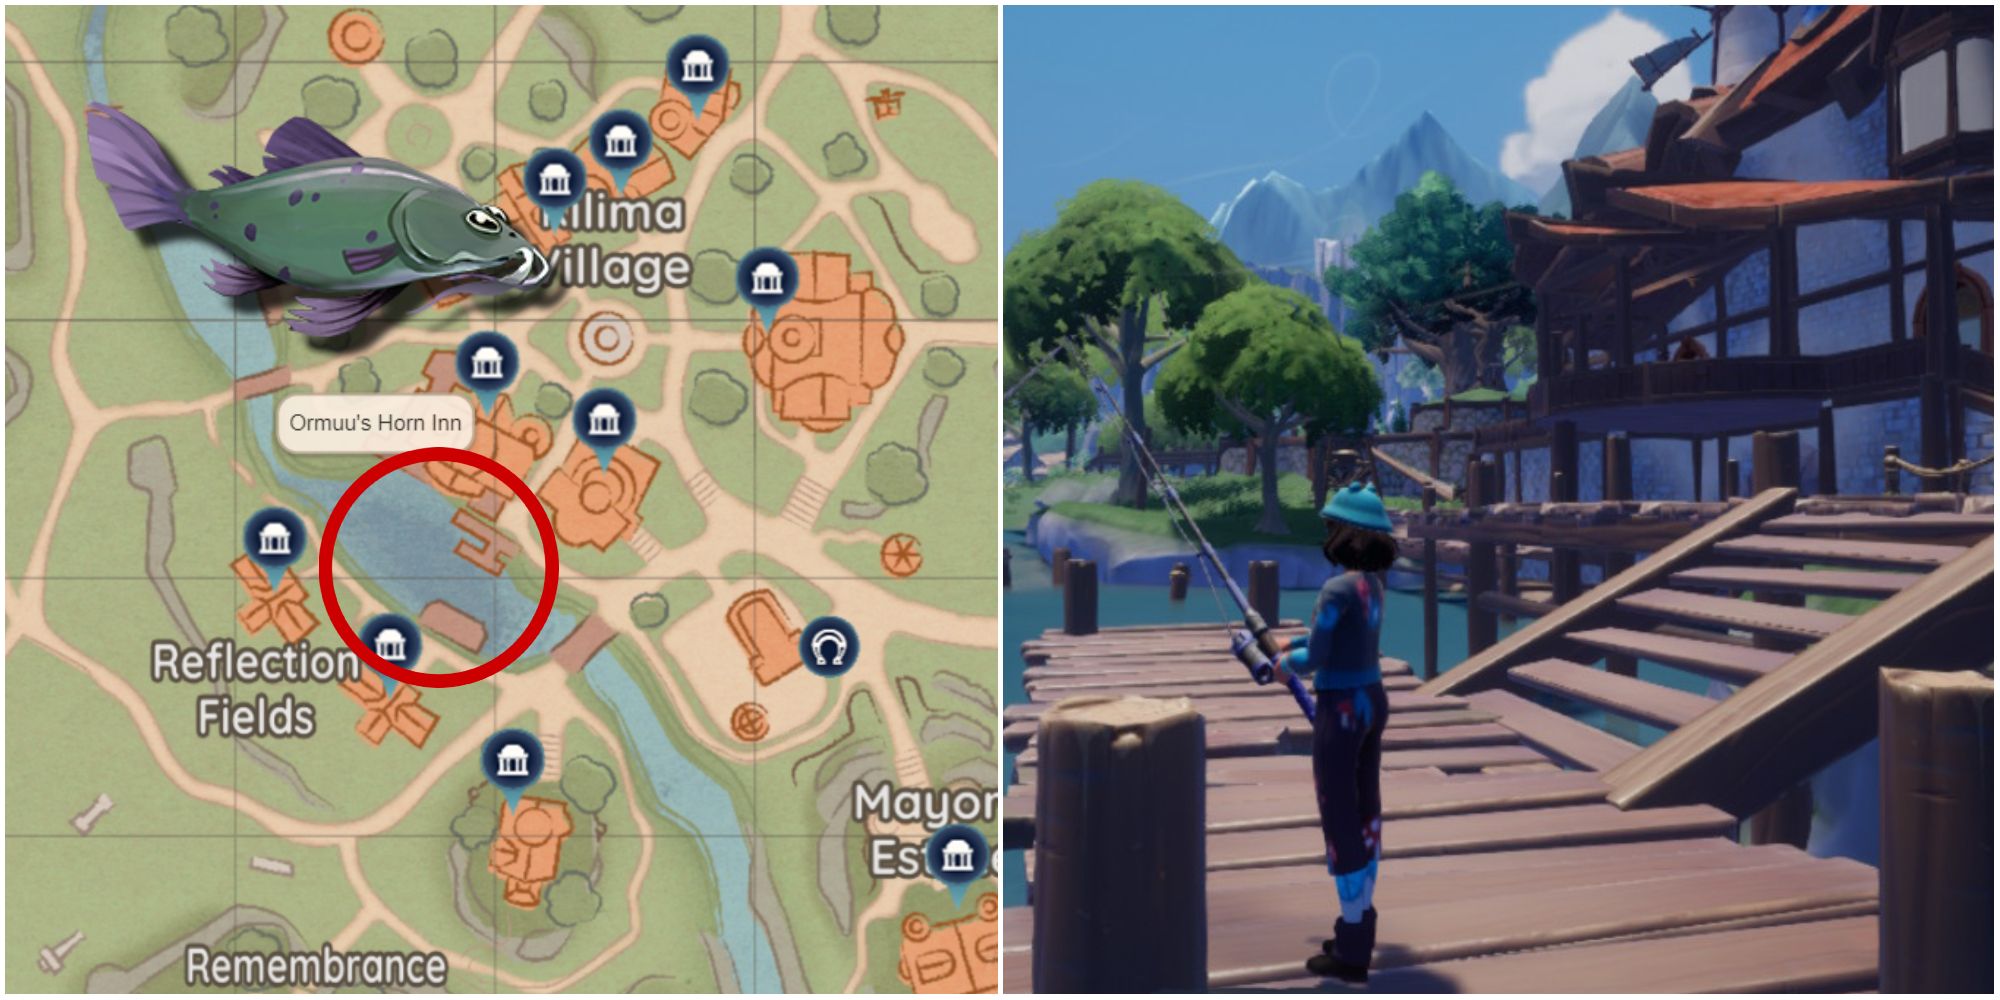 The location of the Ormuu's Horn Inn on a map and a character fishing off of the docks there